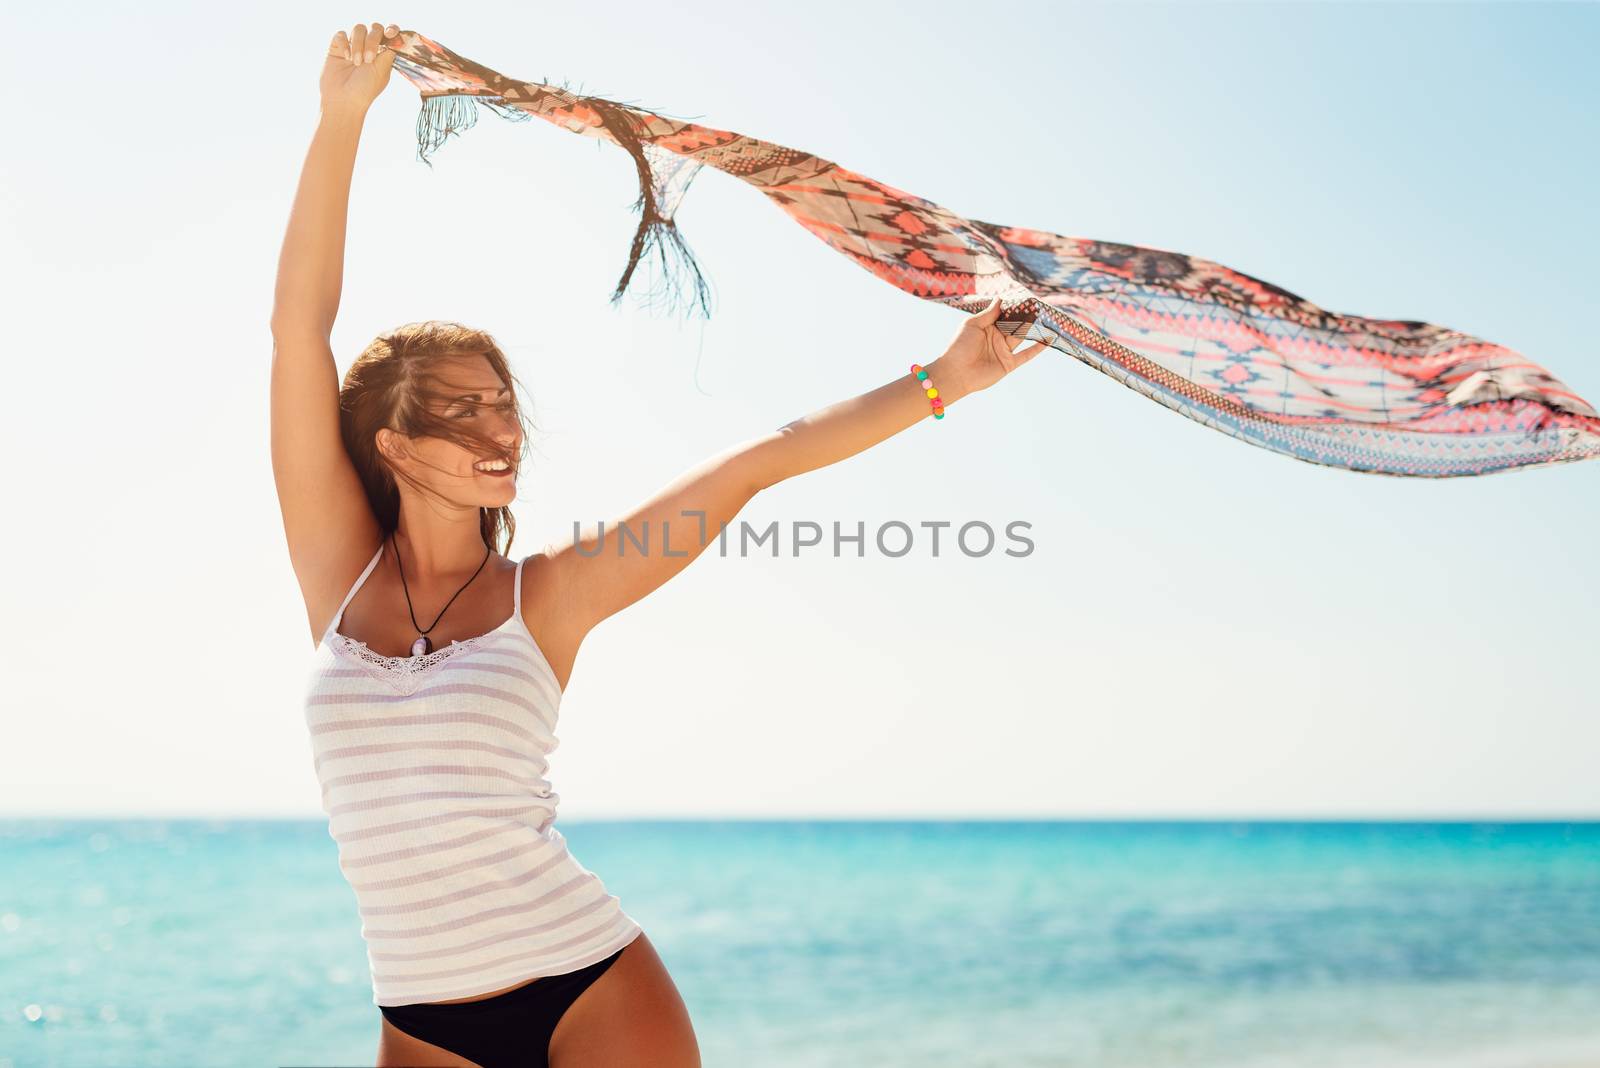 Beautiful young woman posing on the beach. She is holding scarf and looking away with smiling on her face.